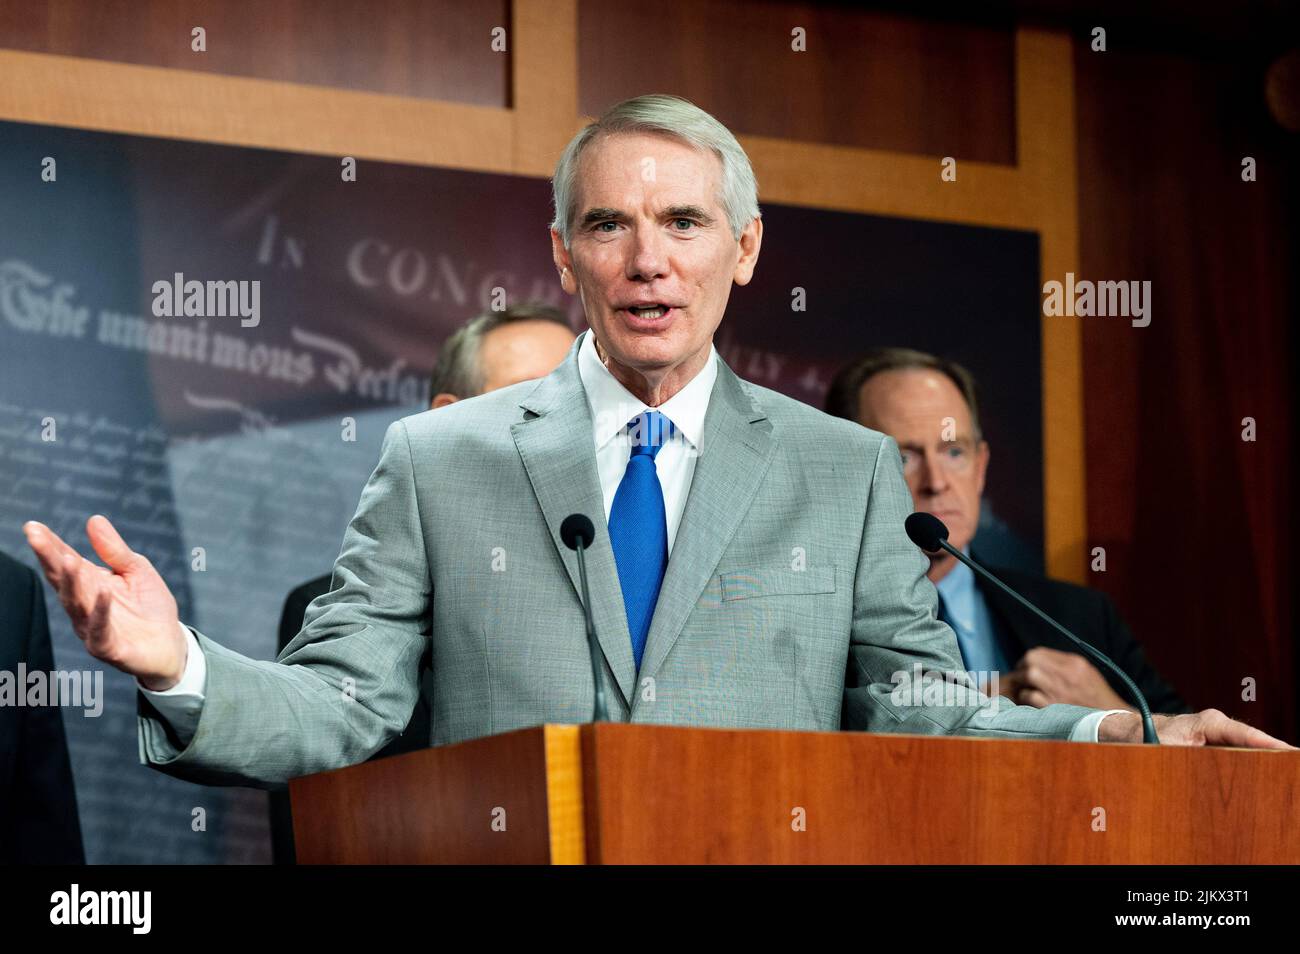 U.S. Senator Rob Portman (R-OH) speaking at a press conference organized by Senate Republicans to discuss Democratic tax and spending policies. (Photo by Michael Brochstein/Sipa USA) Stock Photo